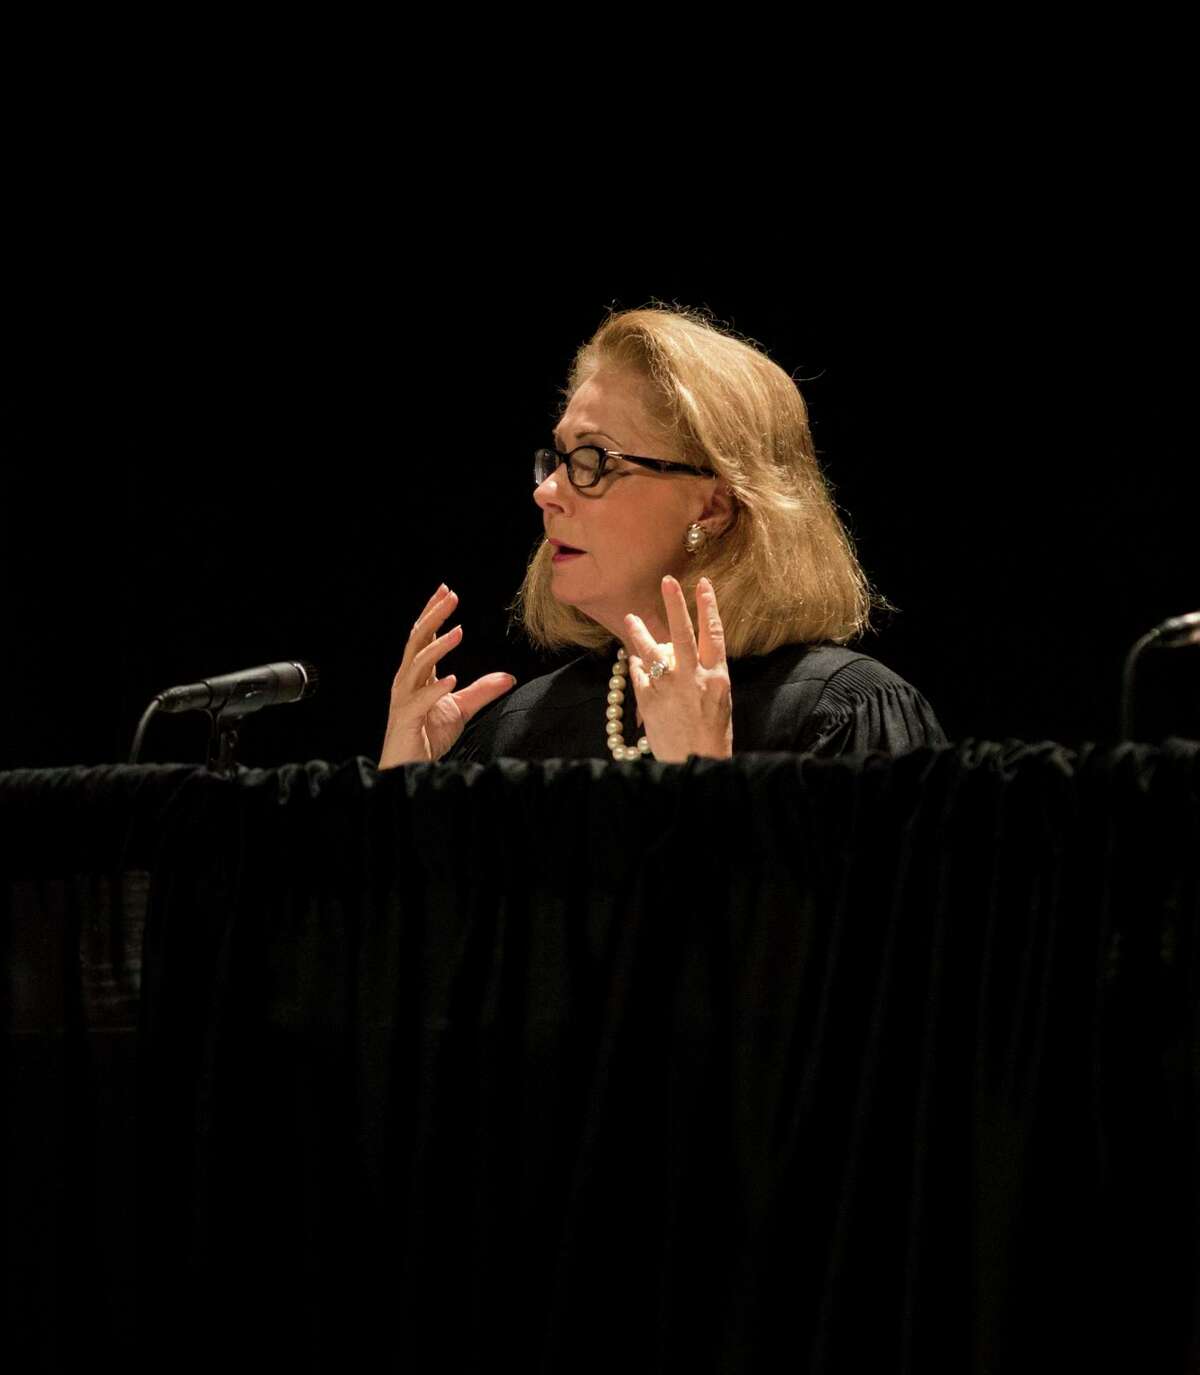 The Texas Supreme Court hears cases at the Wagner Noel Performing Arts Center on Wednesday. Justice zebra H. Lehrmann addresses Lisa Bowlin Hobbs a petitioner from the JBS Carriers Inc. and James Lundry v. Trinette L Washington et al. case 9/19/2018 Jacy Lewis/191 News